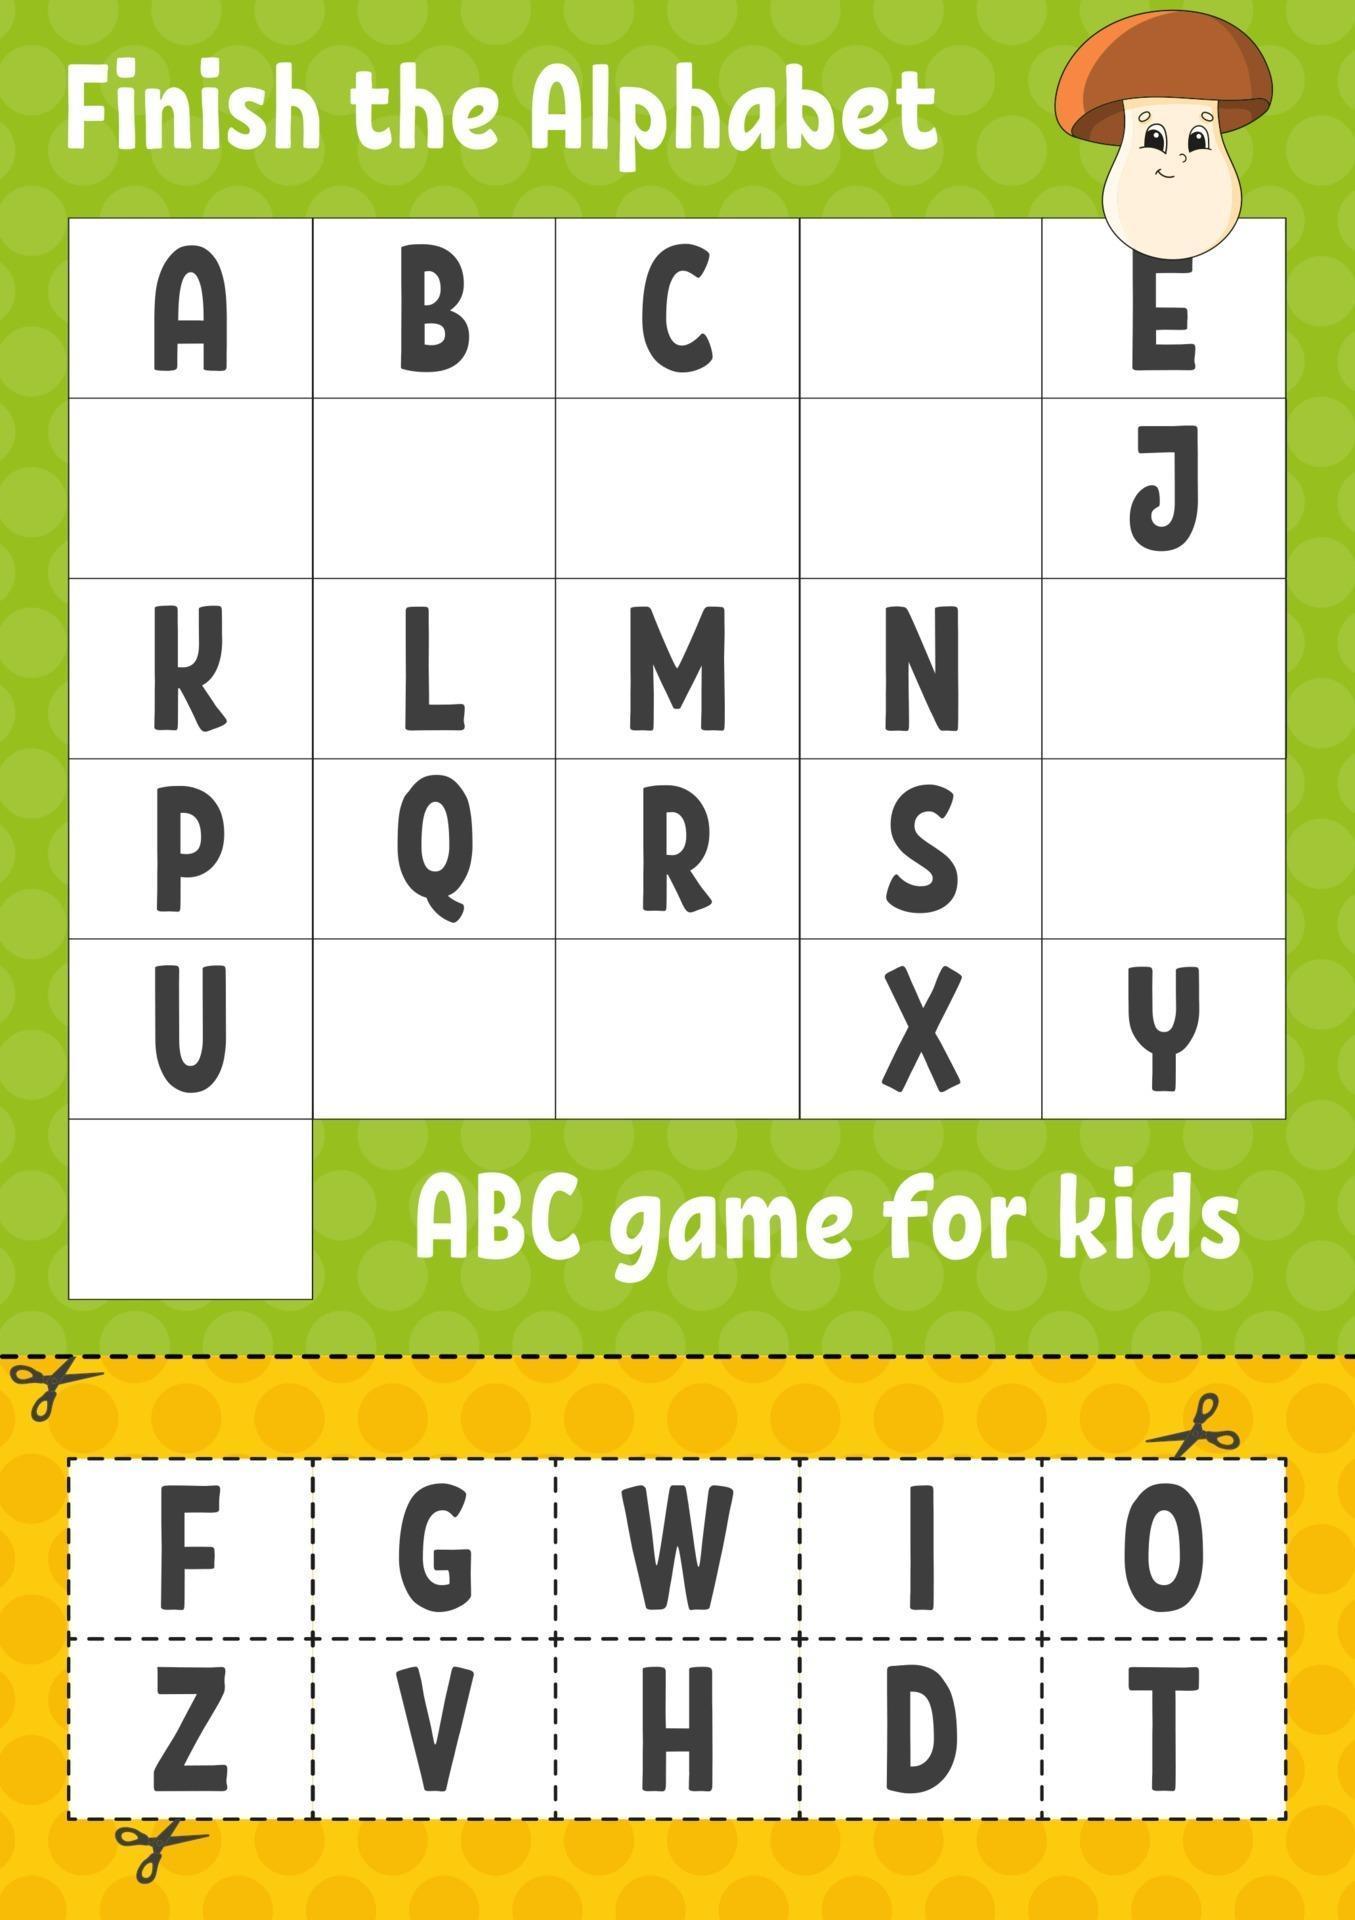 Finish the alphabet. ABC game for kids. Cut and glue. Education